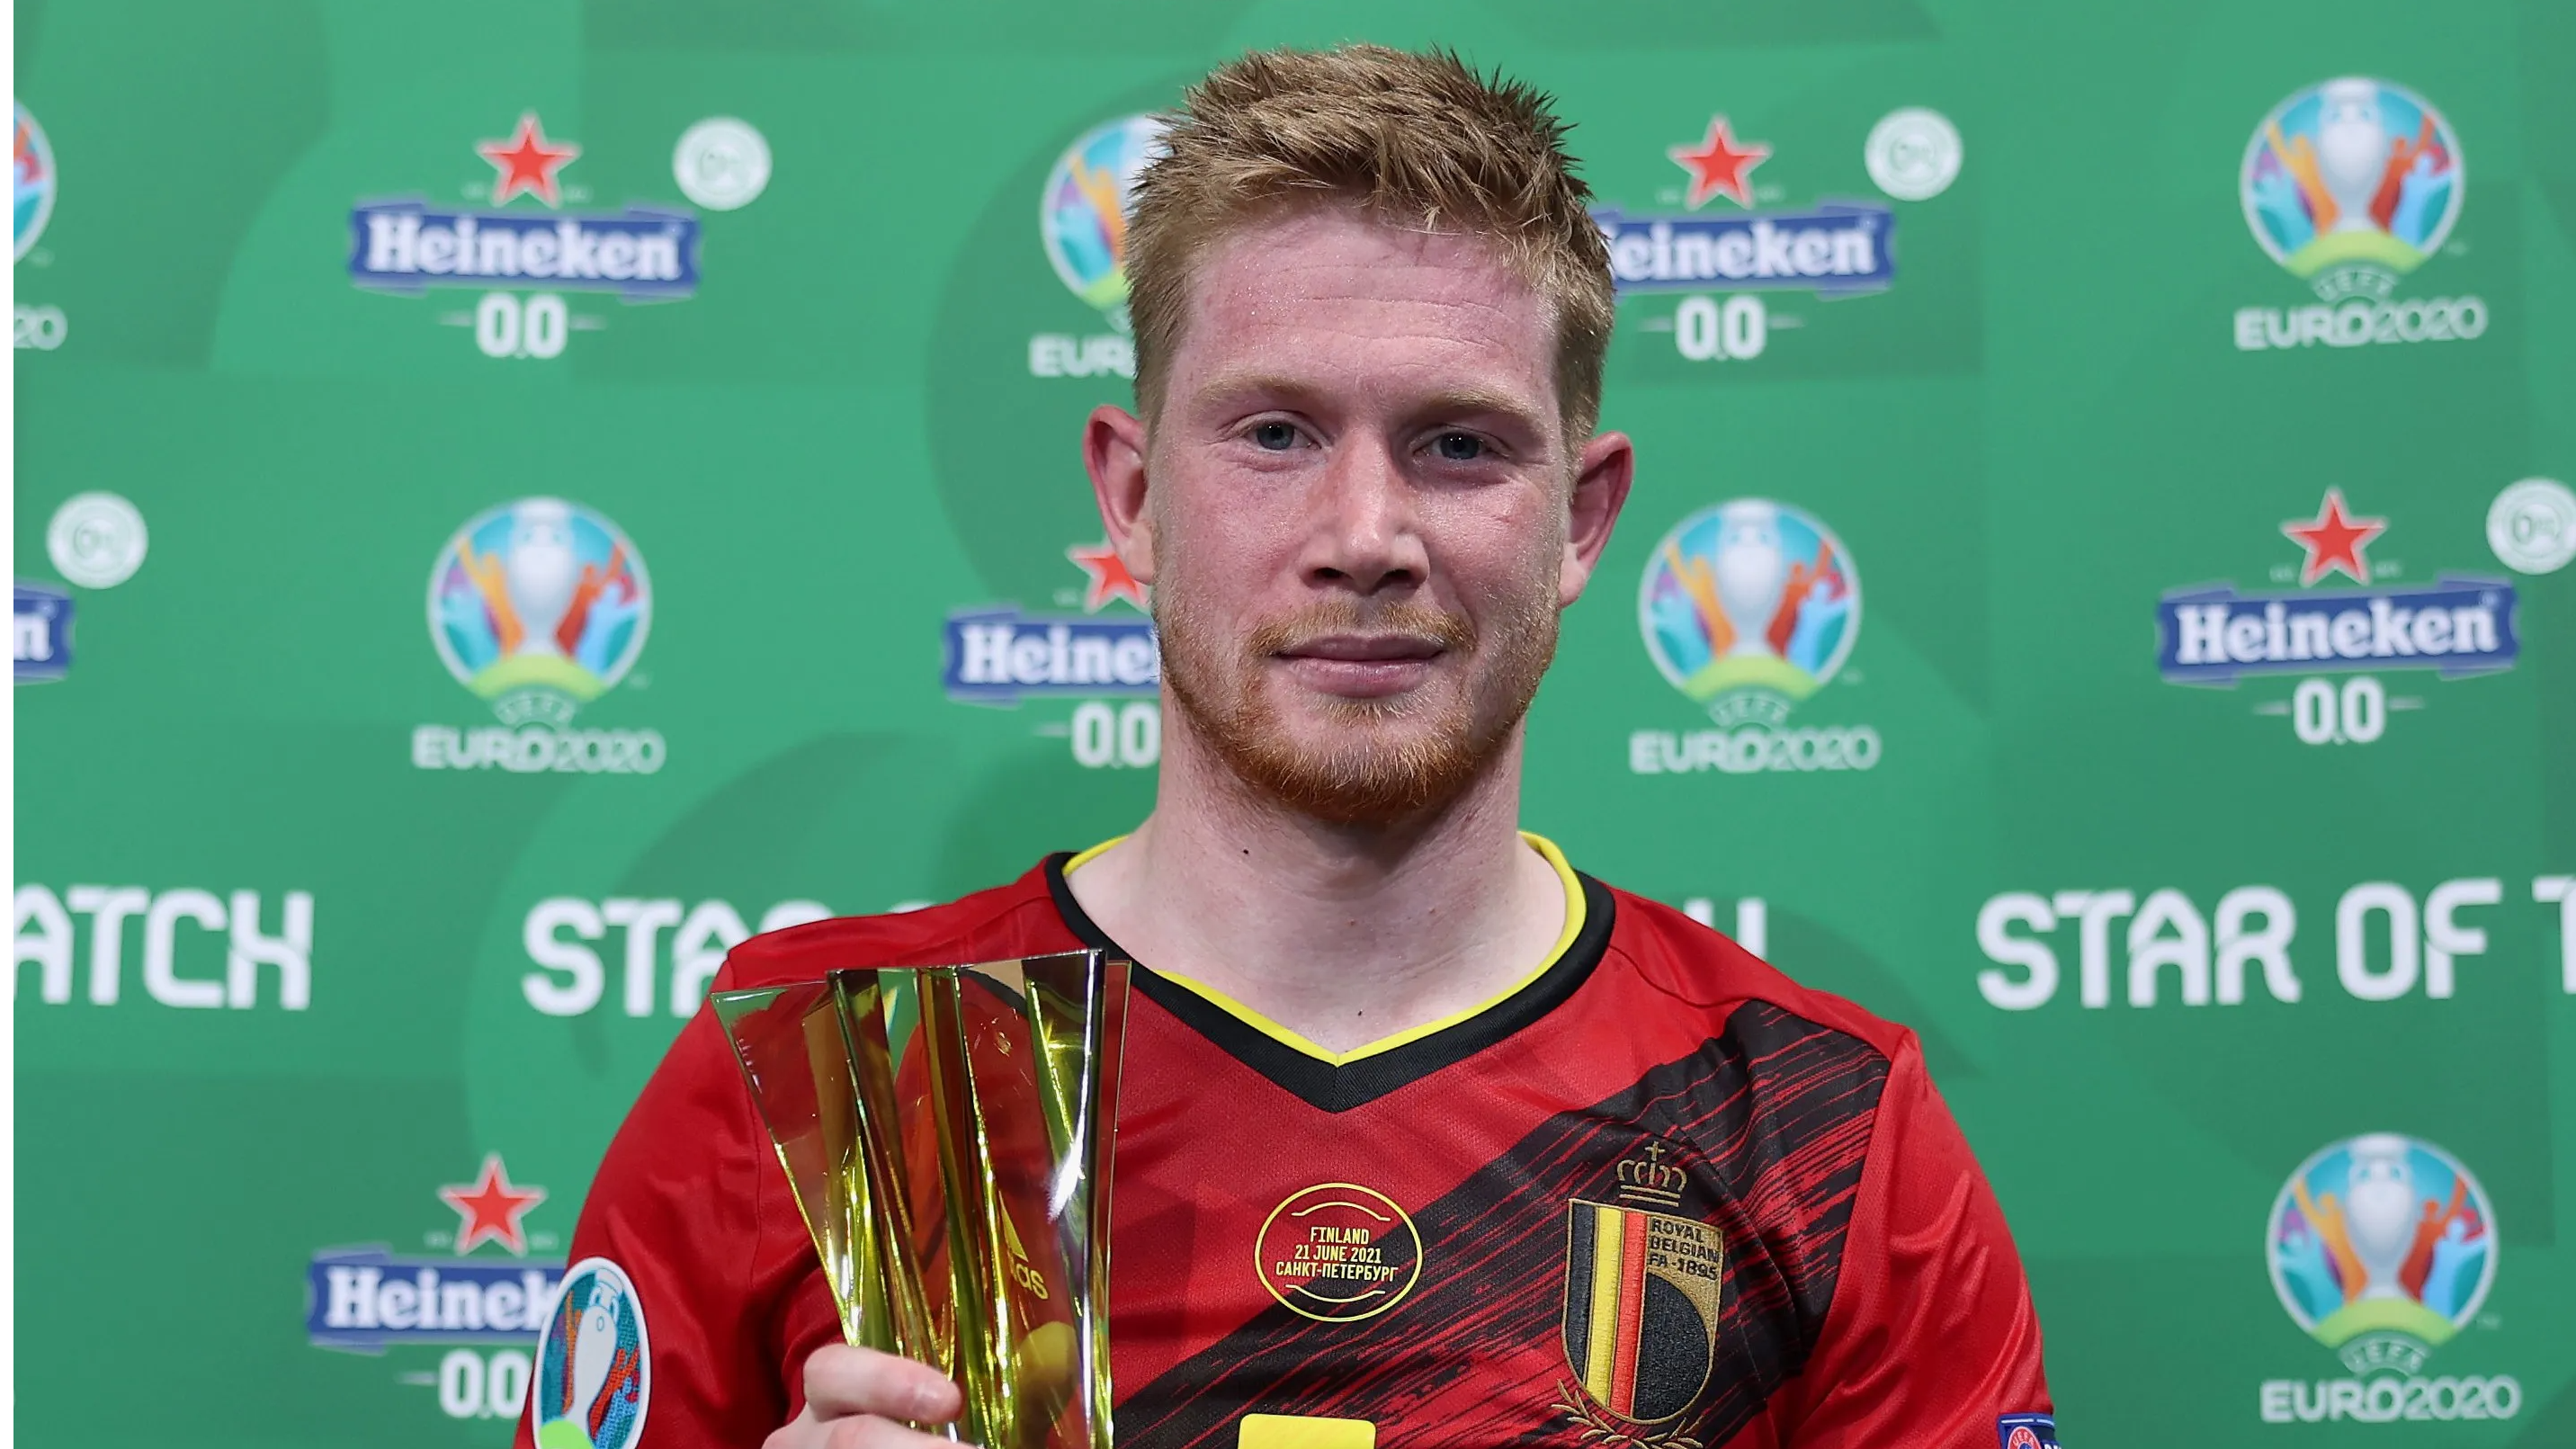 EURO 2020: De Bruyne shines for Belgium as Finland near group stage exit